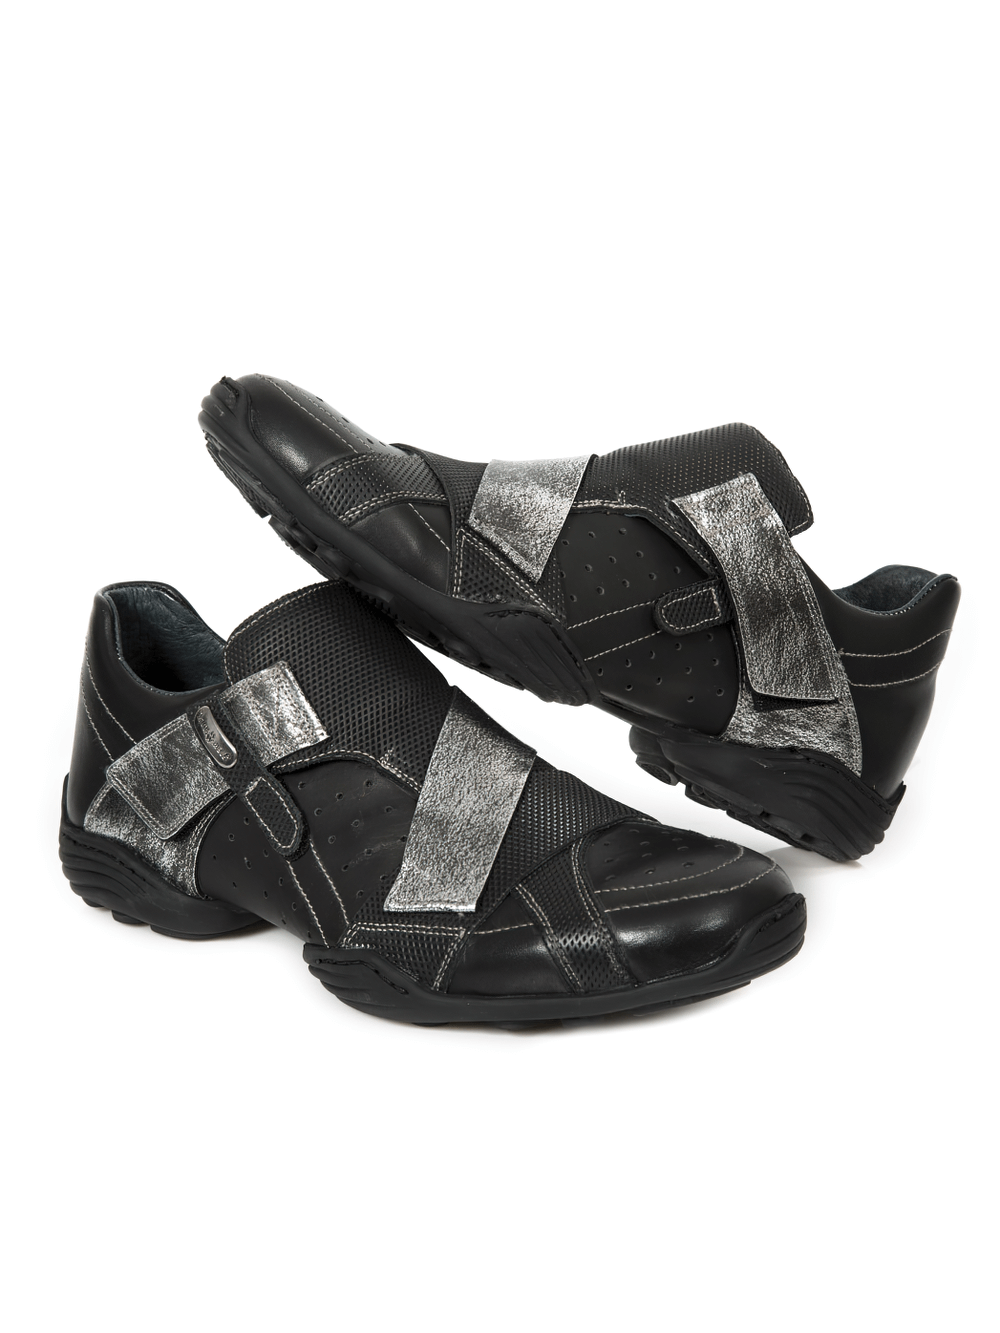 NEW ROCK Men's Black Rock Shoes With Silver Velcro Strap